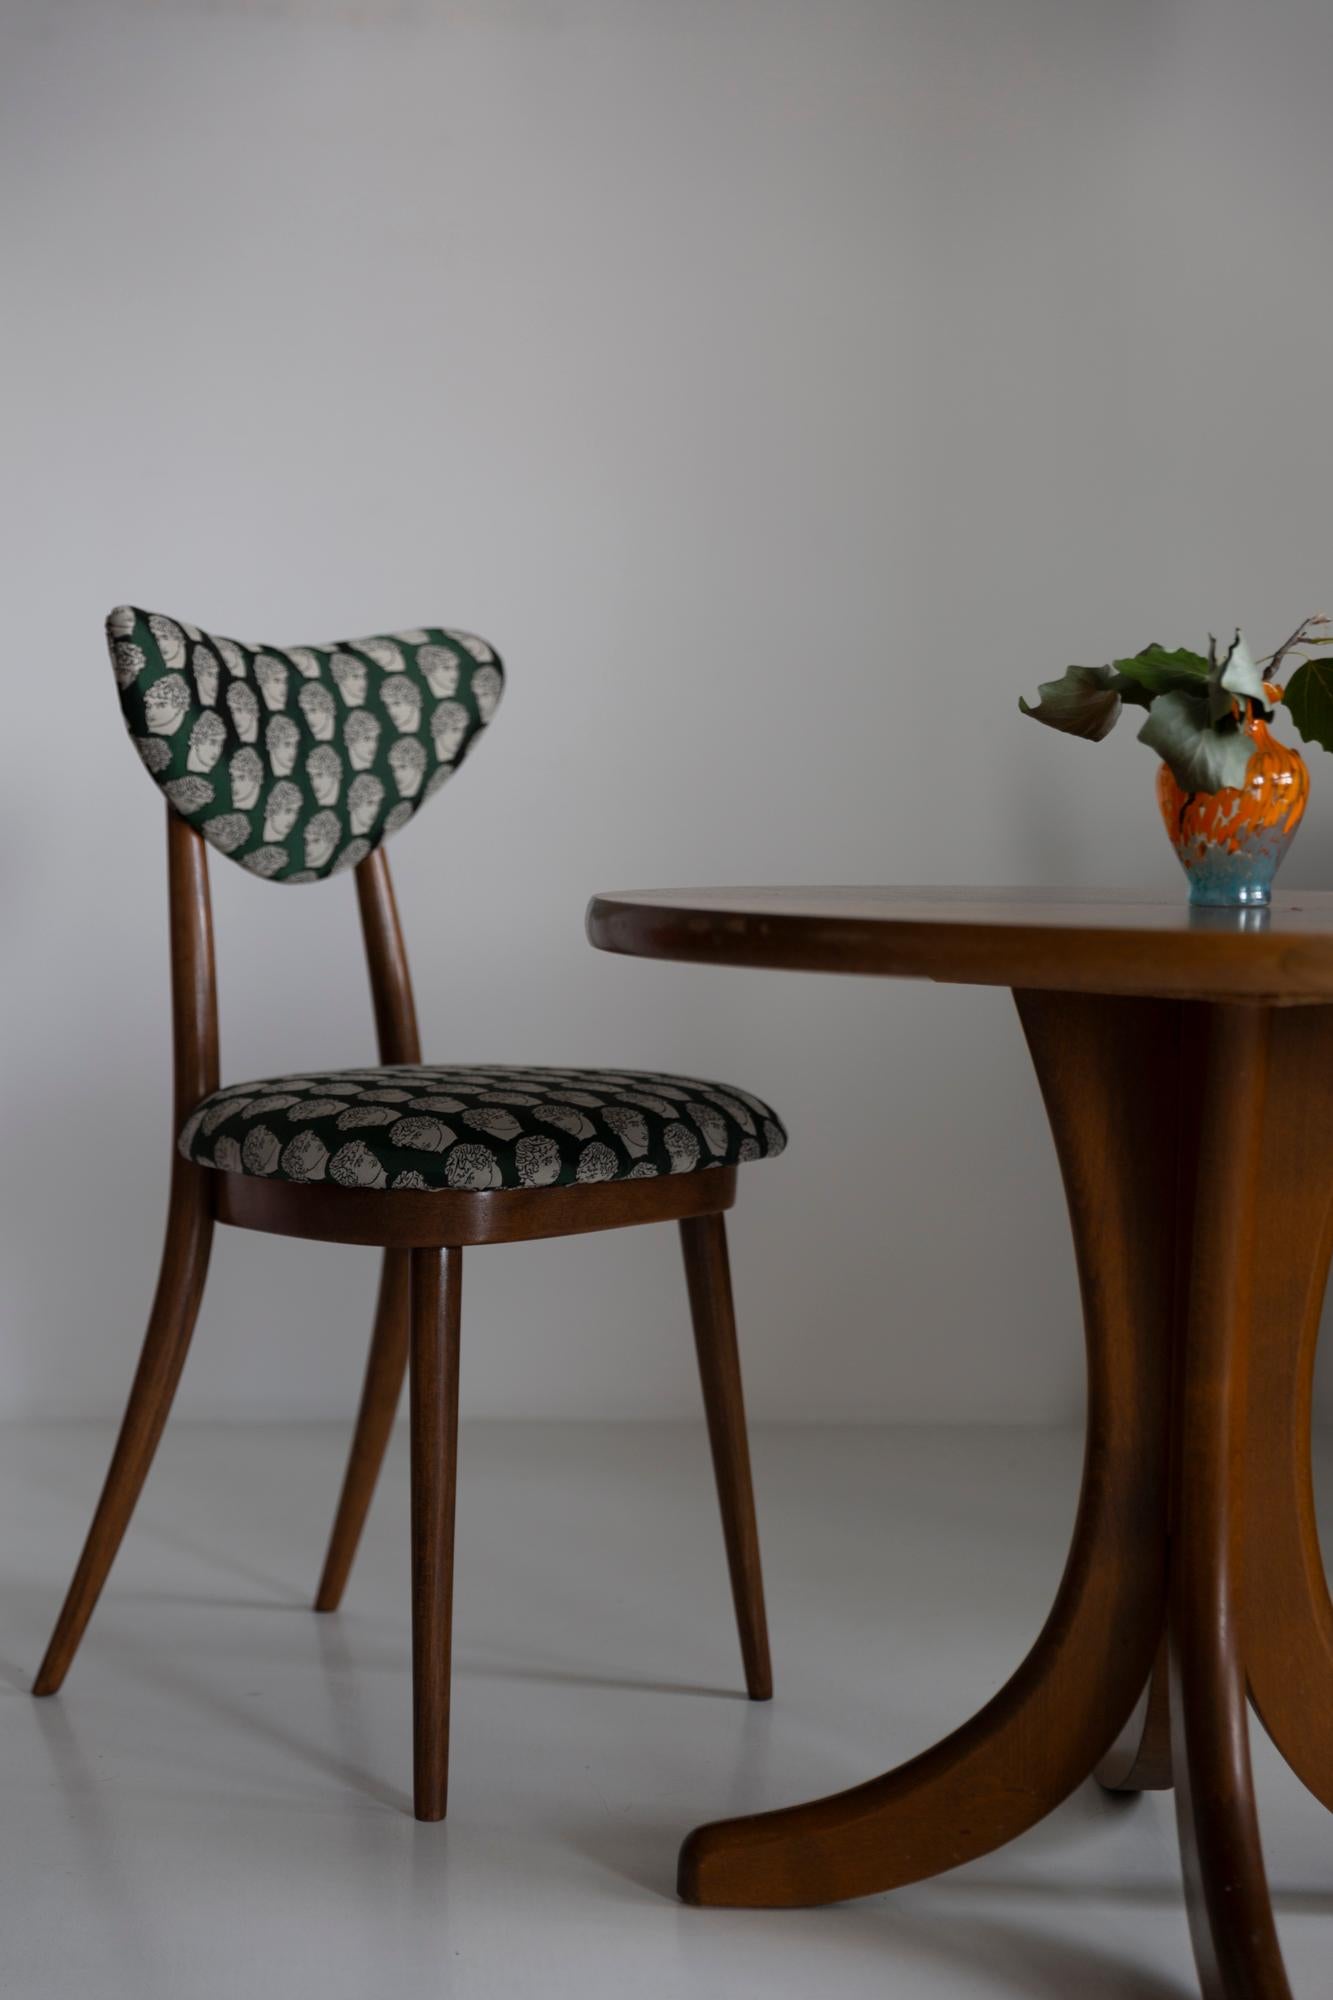 Hand-Crafted Midcentury David Print Emerald Satin, Walnut Wood Heart Chair, Europe, 1960s For Sale